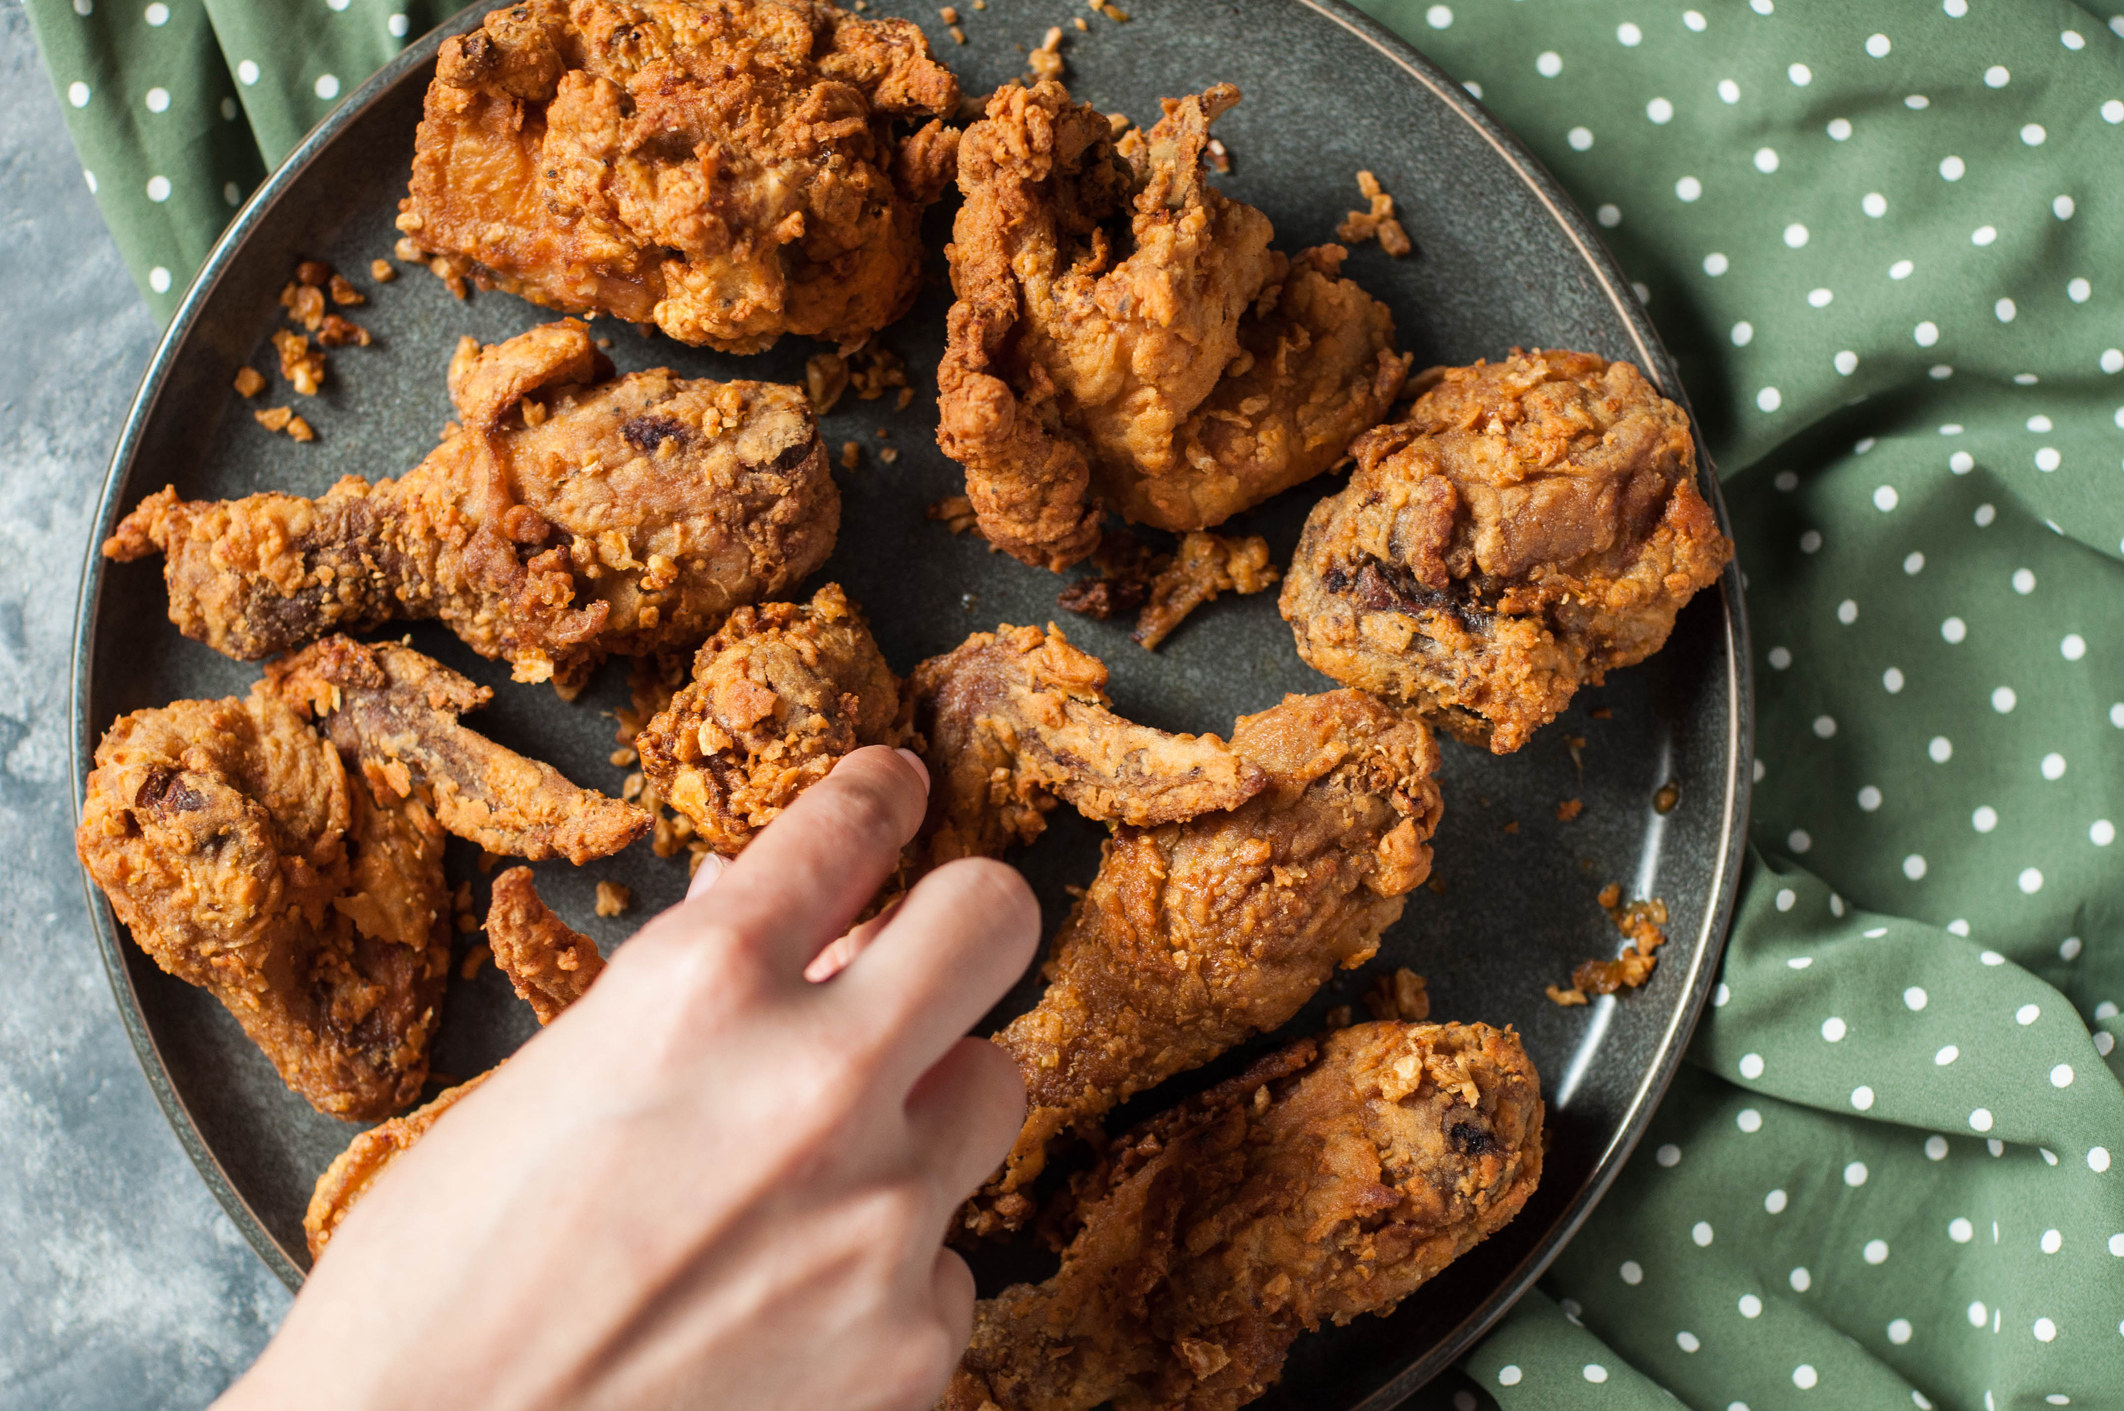 A hand reaching for fried chicken.